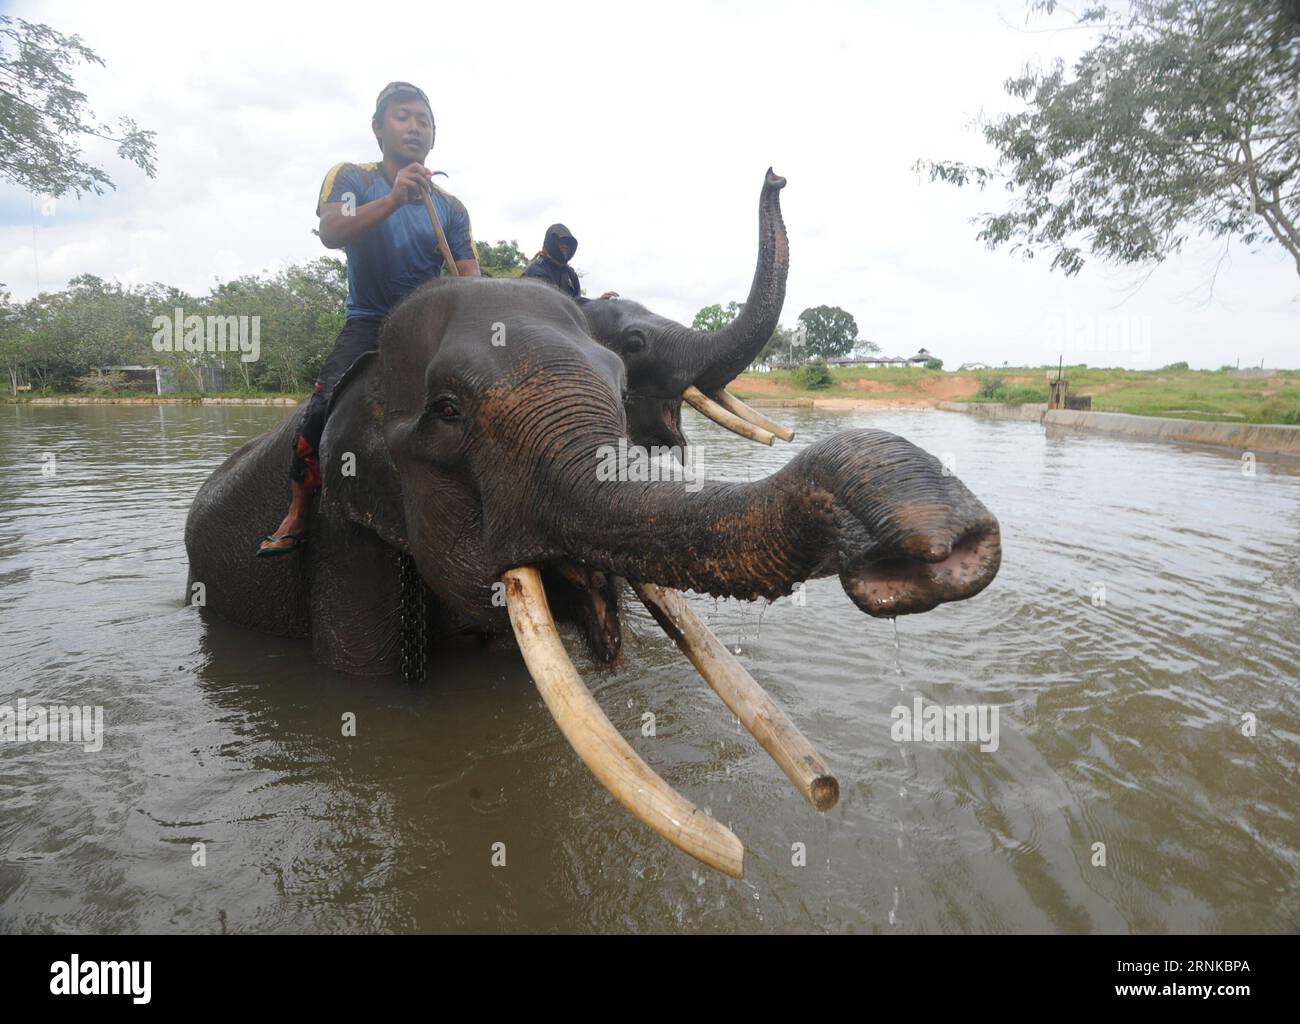 (170321) -- LAMPUNG, March 21, 2017 -- Photo taken on March 20, 2017 shows two mahouts bathing Sumatran elephants in water reservoir at elephant training center in Way Kambas National Park, East Lampung district, Lampung Province, Indonesia. ) (lrz) INDONESIA-LAMPUNG-SUMATRAN ELEPHANT AgungxKuncahyaxB. PUBLICATIONxNOTxINxCHN   LAMPUNG March 21 2017 Photo Taken ON March 20 2017 Shows Two Mahouts bathing Sumatran Elephants in Water Reservoir AT Elephant Training Center in Way kambas National Park East LAMPUNG District LAMPUNG Province Indonesia lrz Indonesia LAMPUNG Sumatran Elephant AgungxKunca Stock Photo